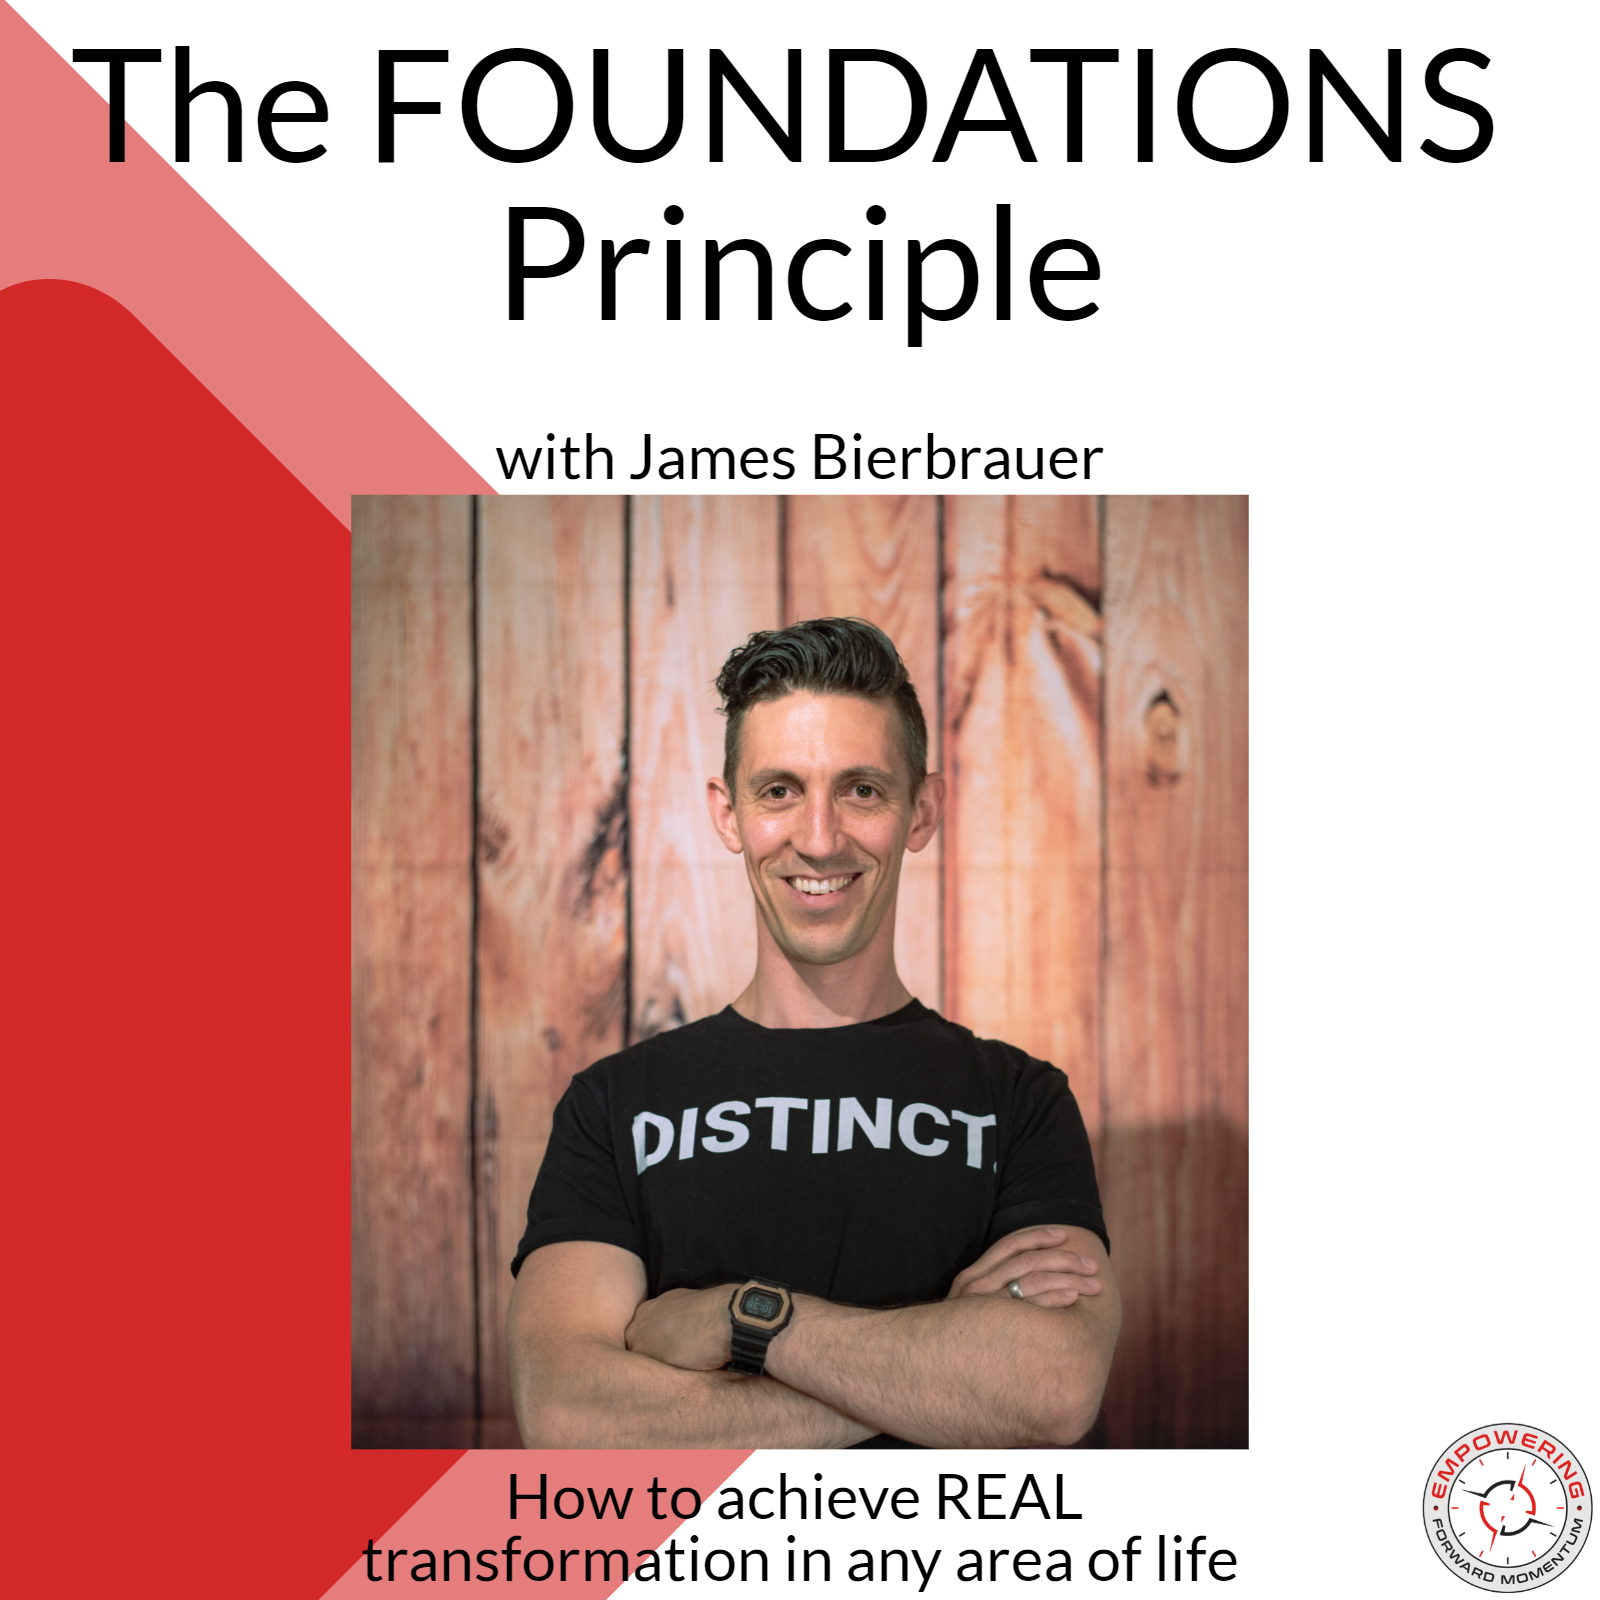 The Foundations Principle   with James Bierbrauer